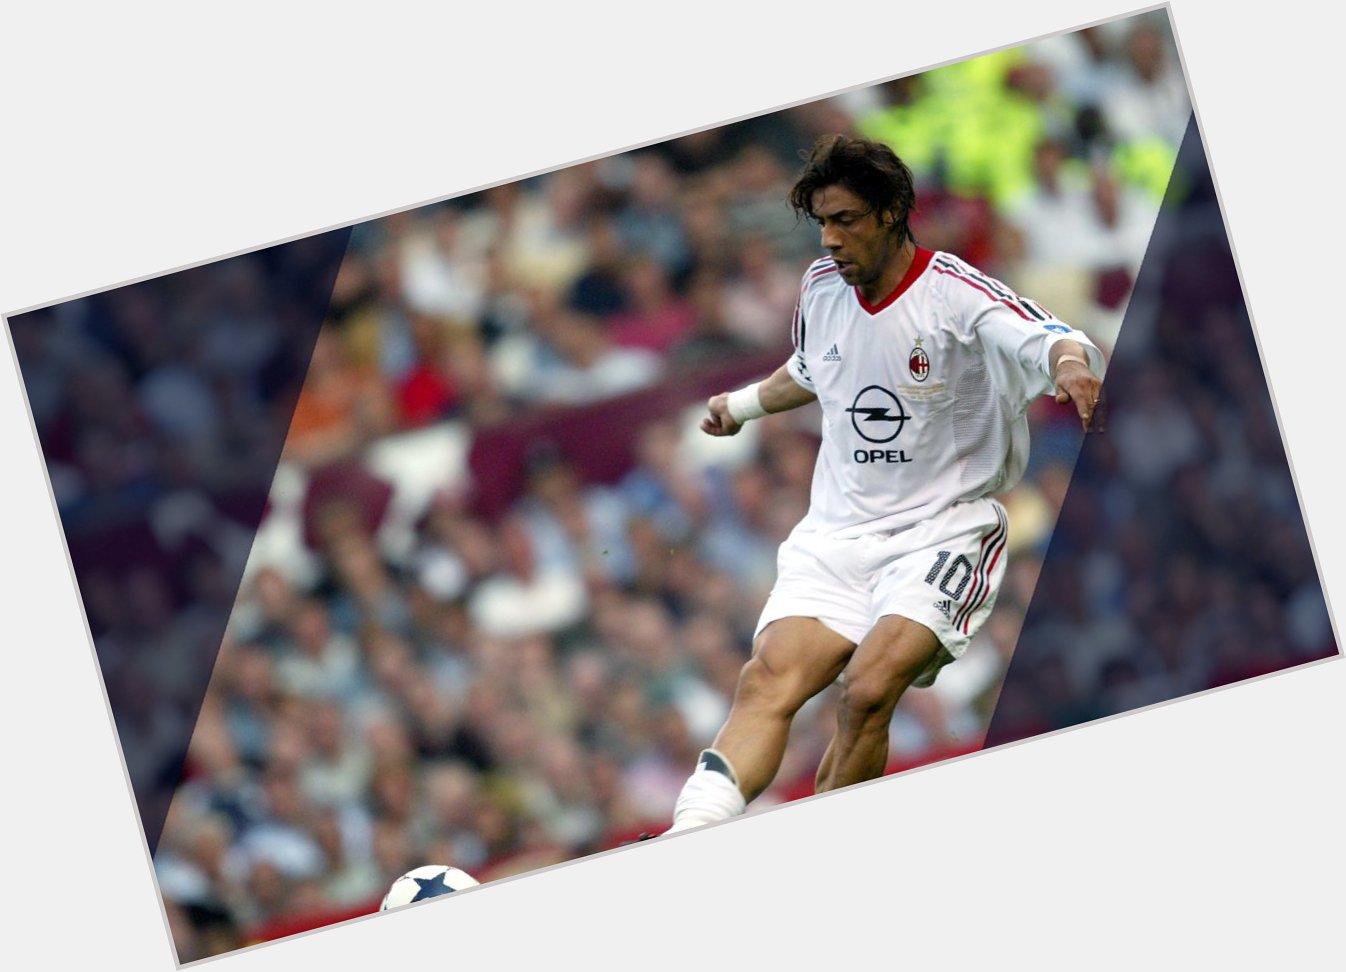 The definition of \\pulling the strings\\

Happy 49th birthday to the Midfield Maestro, Rui Costa.   